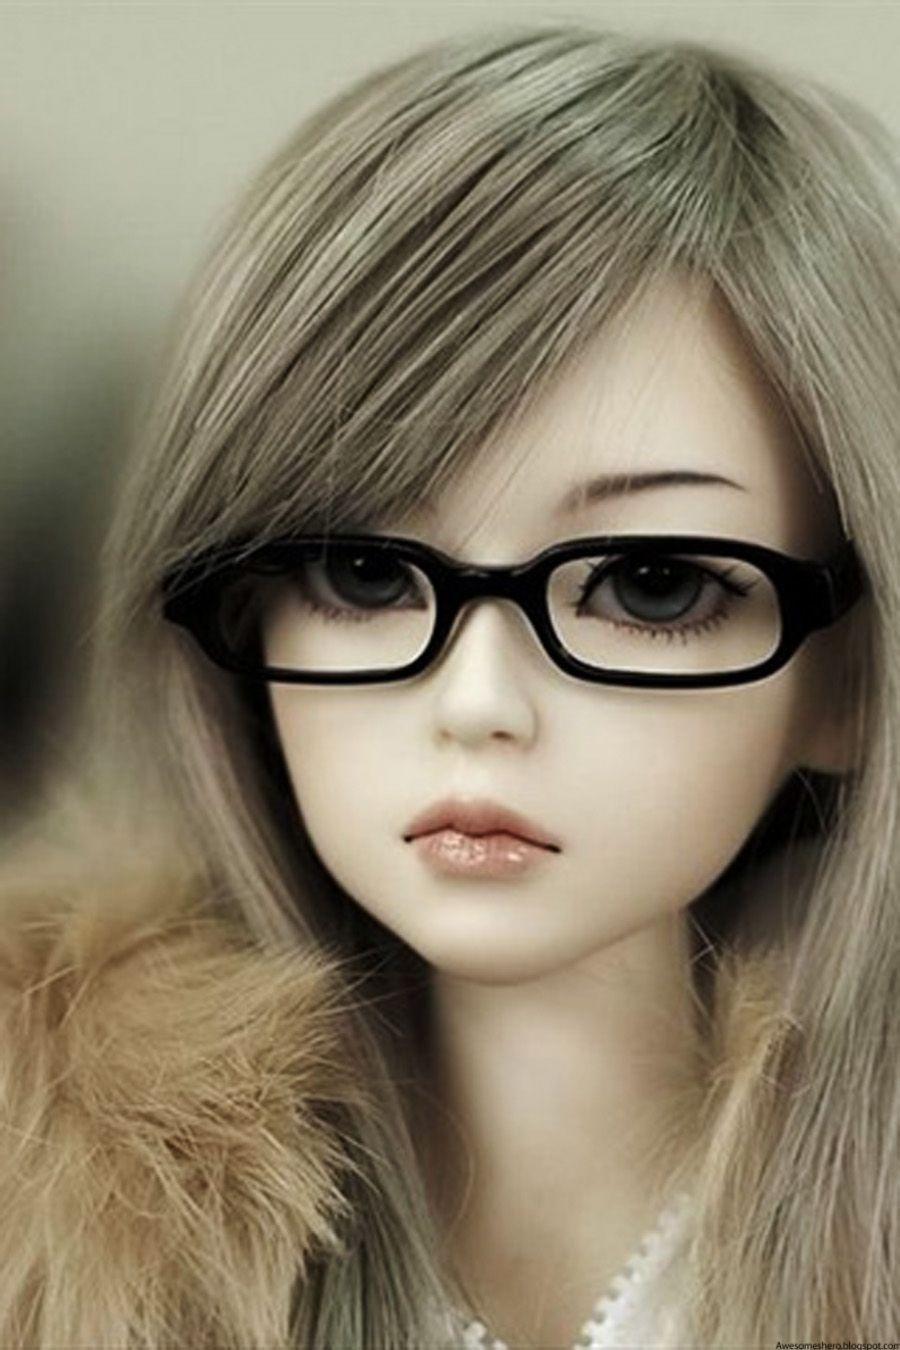 Cute Barbie Doll Photo Wallpapers - Wallpaper Cave